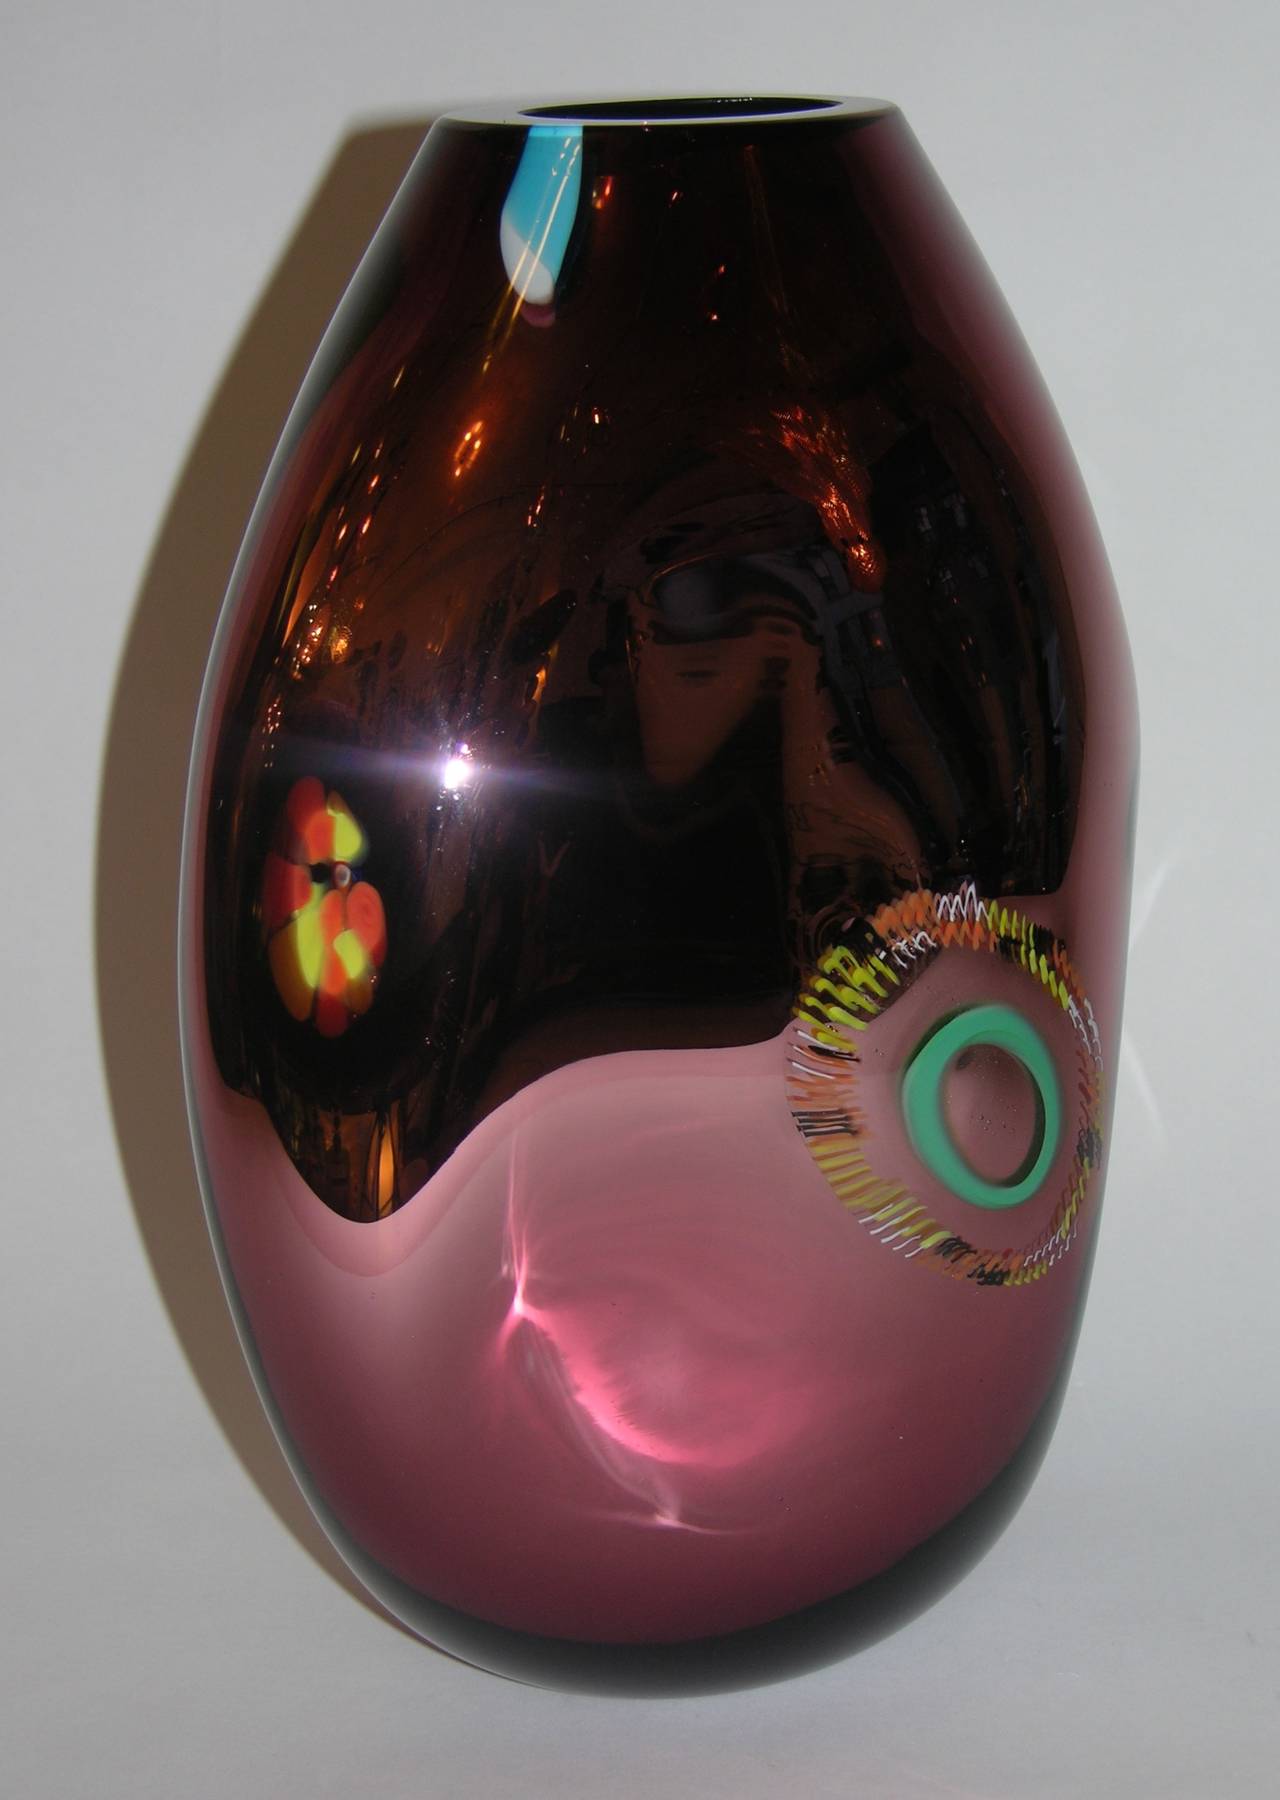 Italian Murano glass vase, contemporary Work of Art signed by Davide Dona.
The execution is extraordinary and reveals mastership in glass blowing and decorative techniques: The ovoid-shaped vase is worked with a sophisticated mirrored metallic